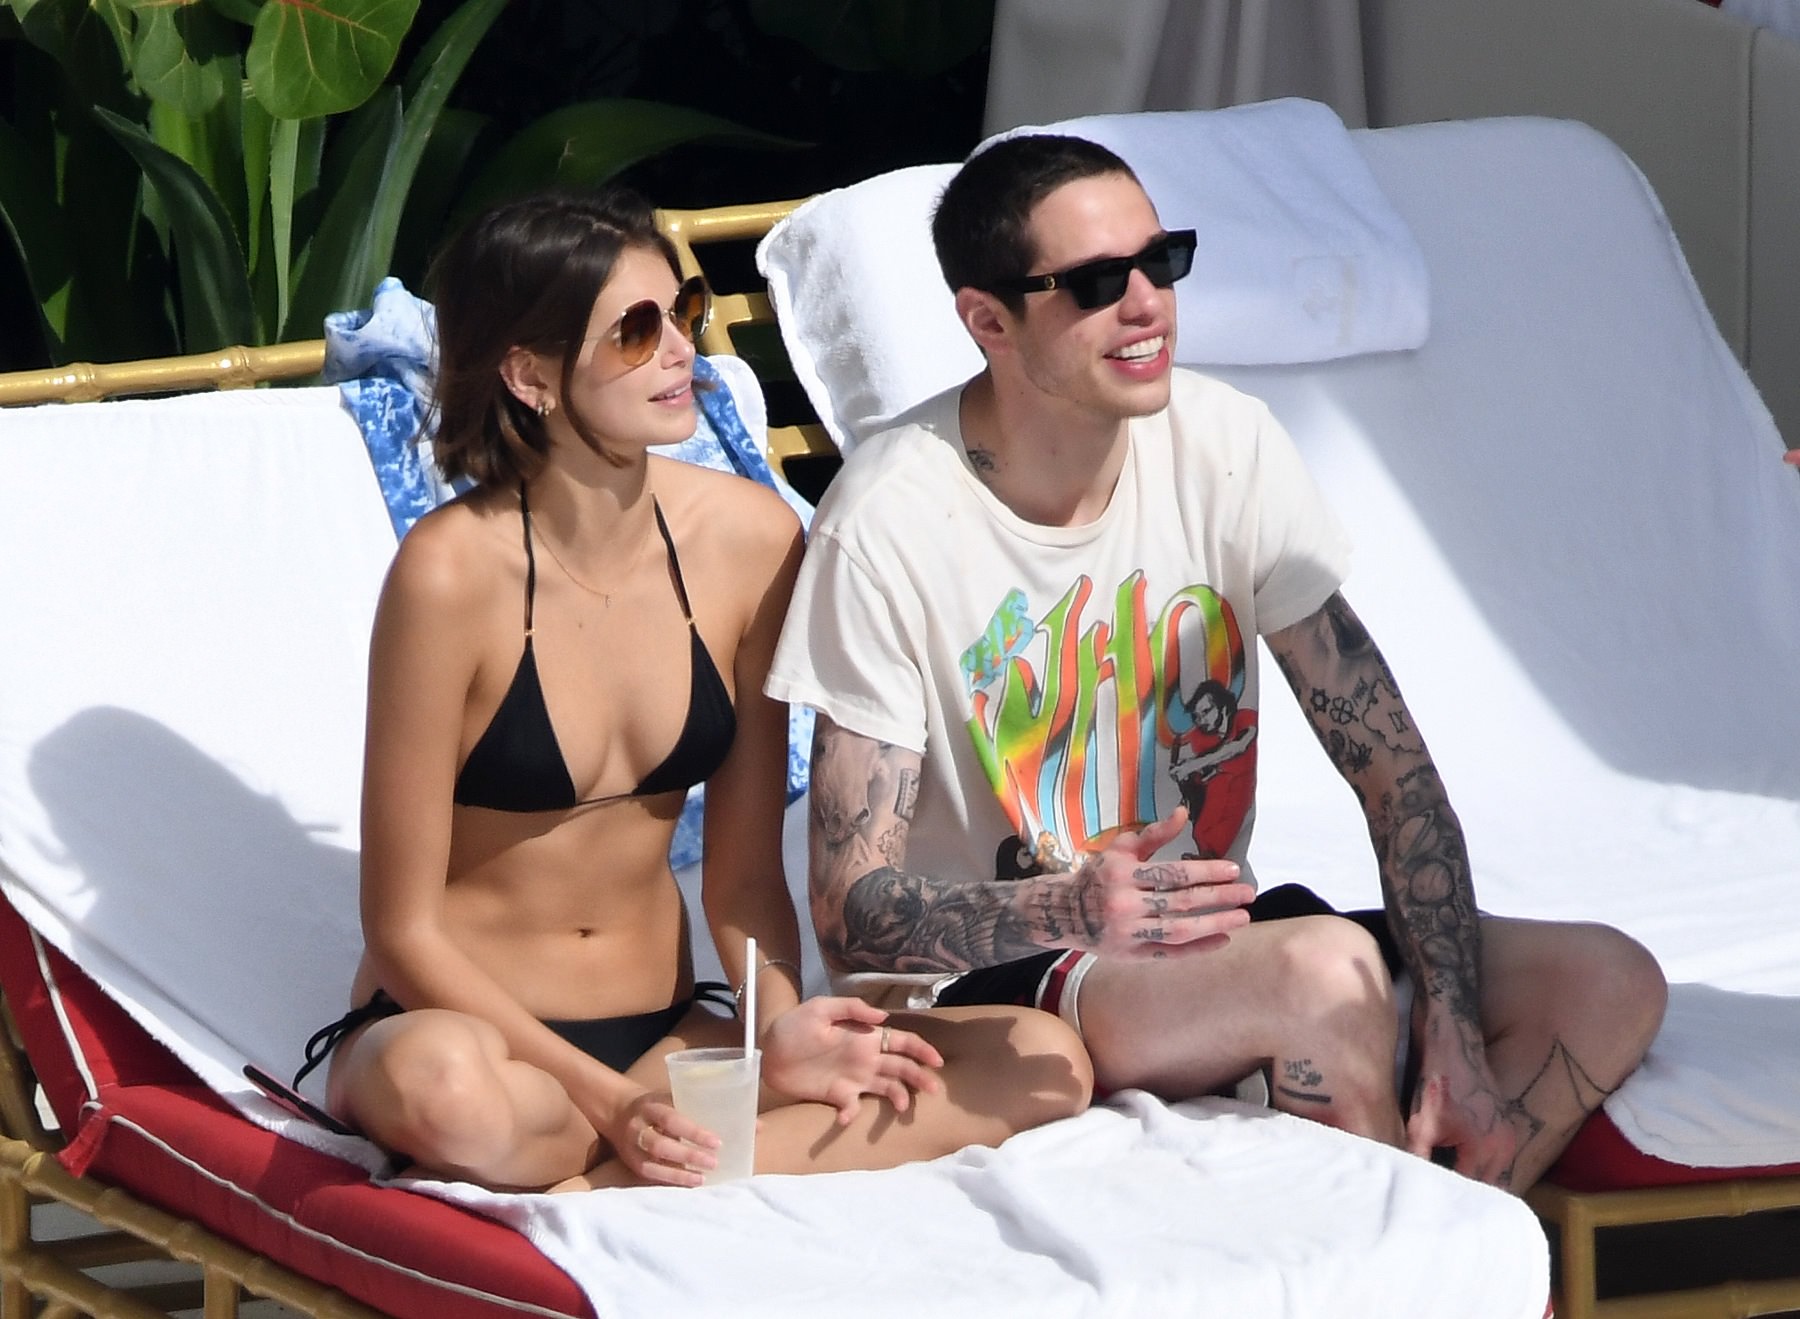 Kaia Gerber in a Black Lace Bikini by Poolside and Enjoys with Boyfriend Set 1